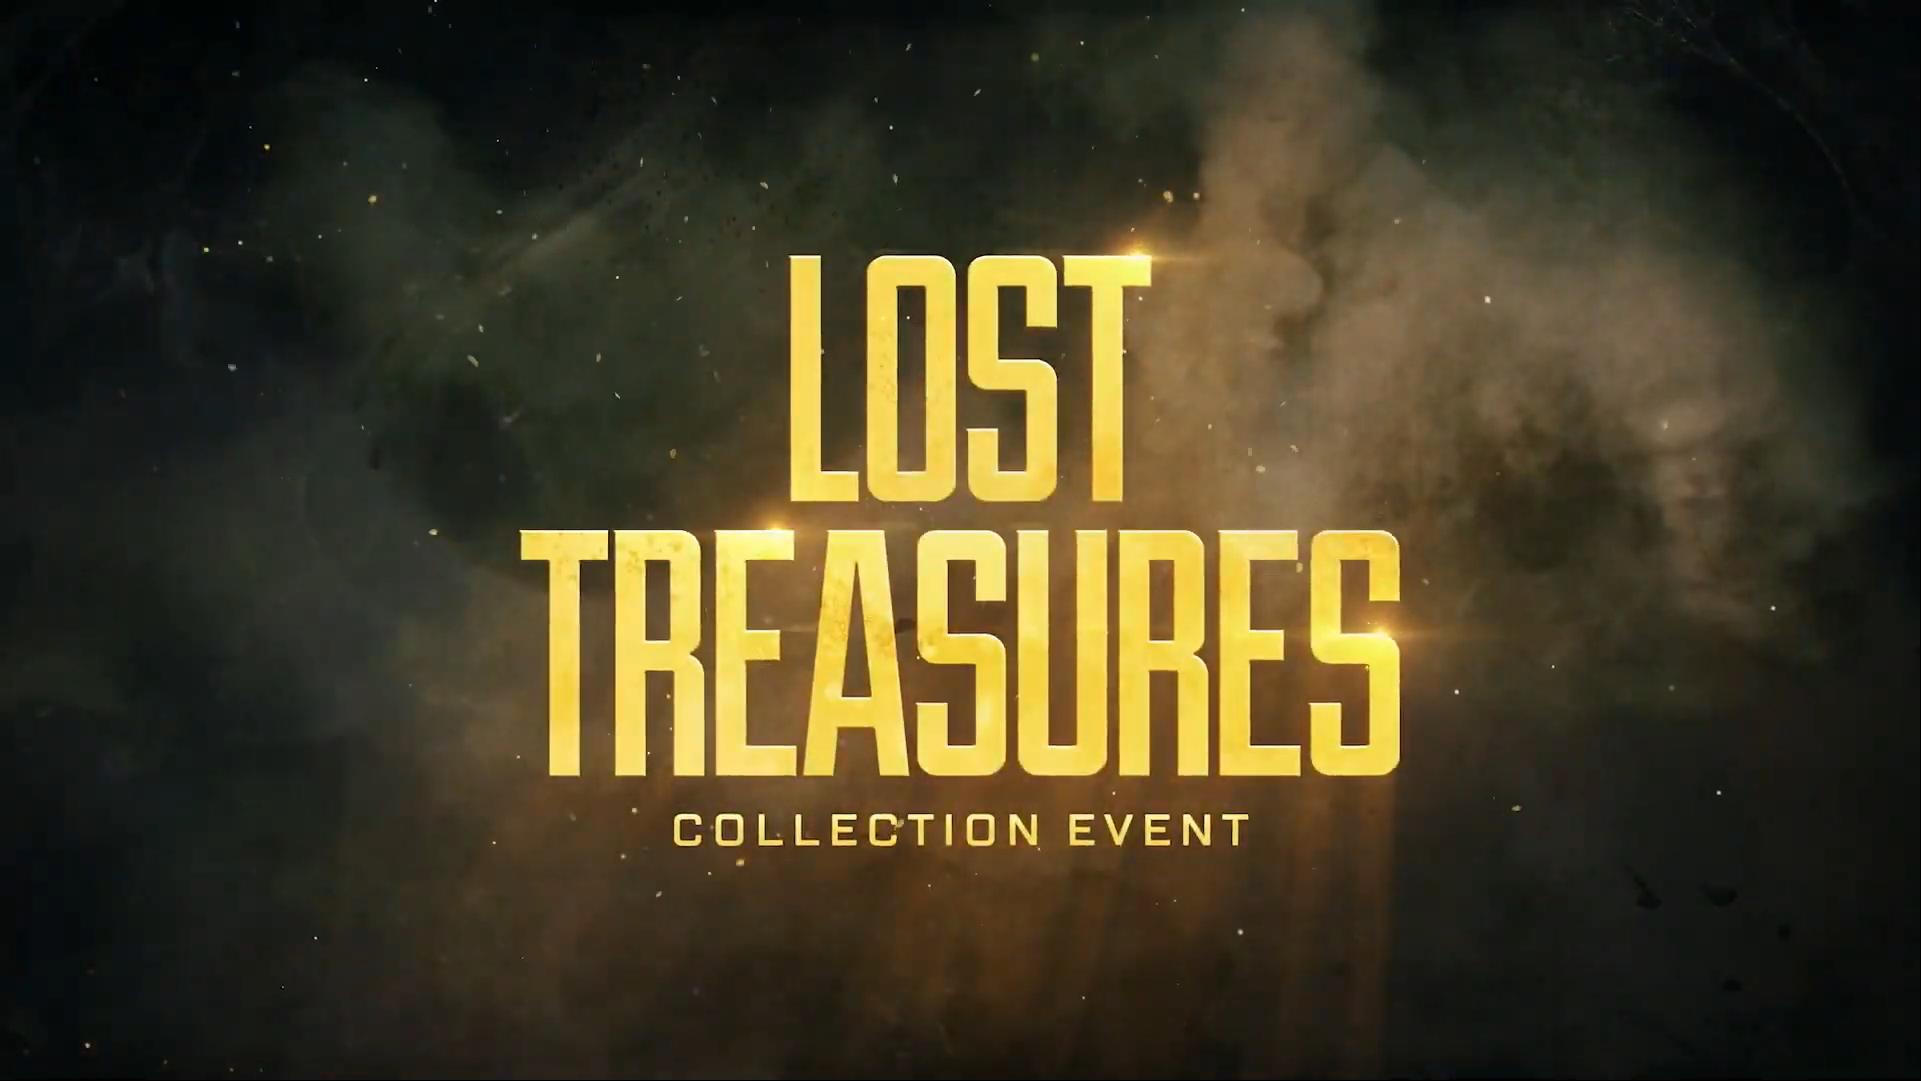 The next Apex Legends collection event, Lost Treasures, will arrive in-game on June 23.